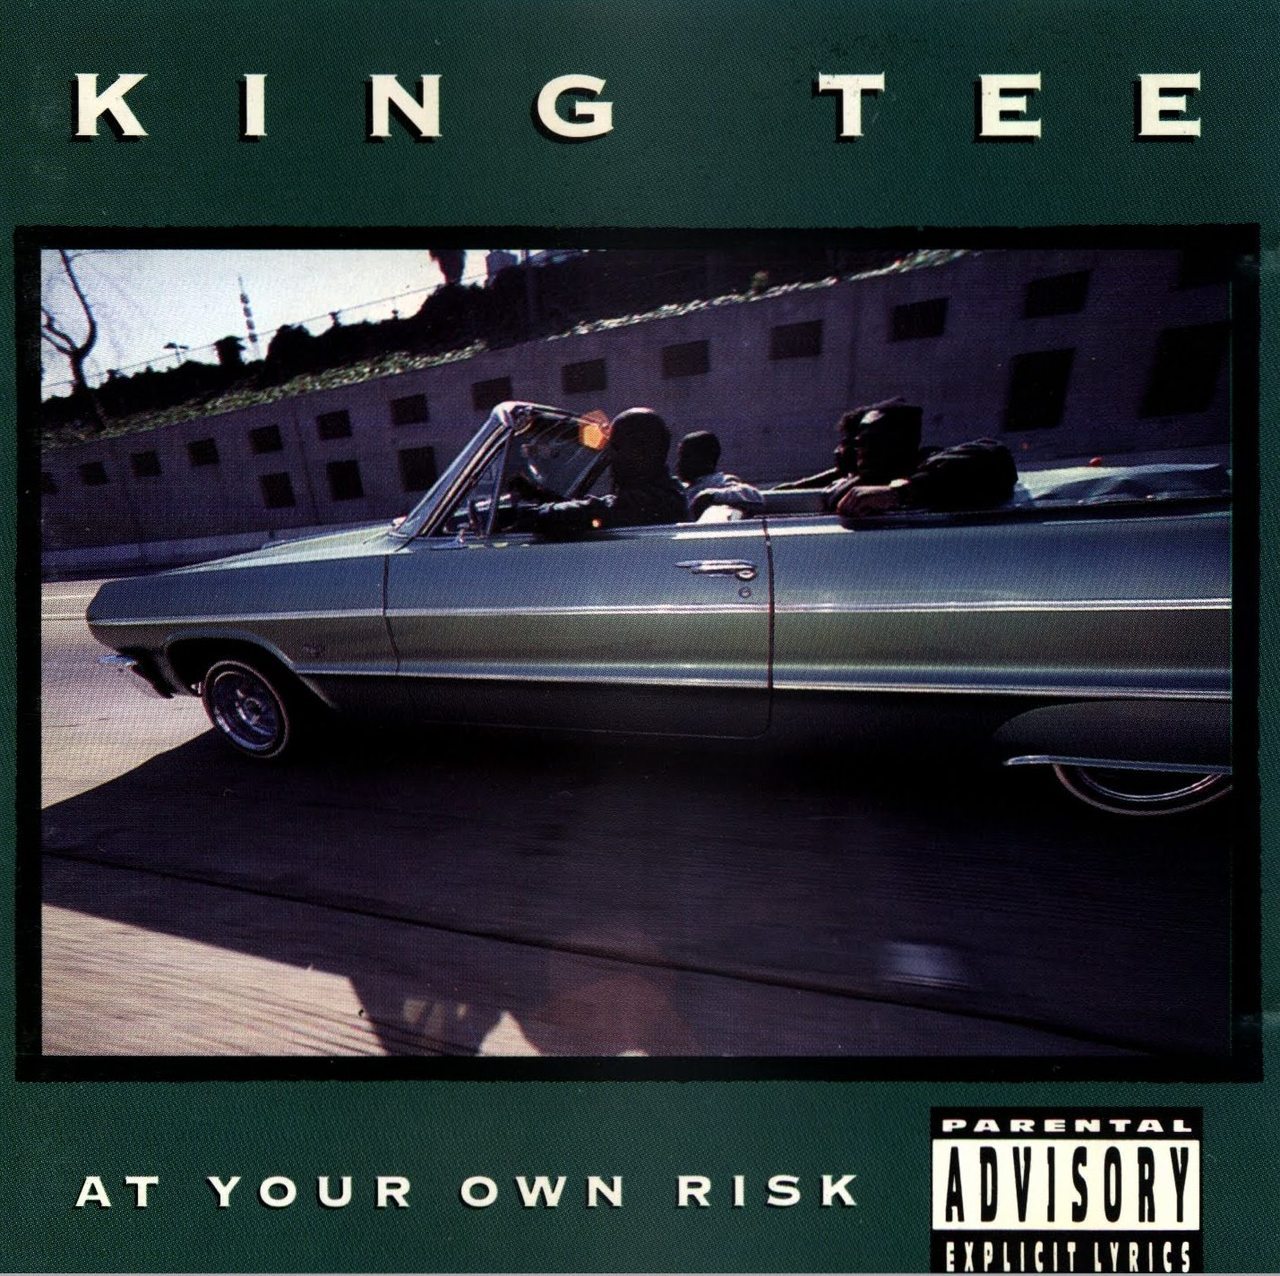 BACK IN THE DAY |9/24/90| King Tee released his second album, At Your Own Risk, on